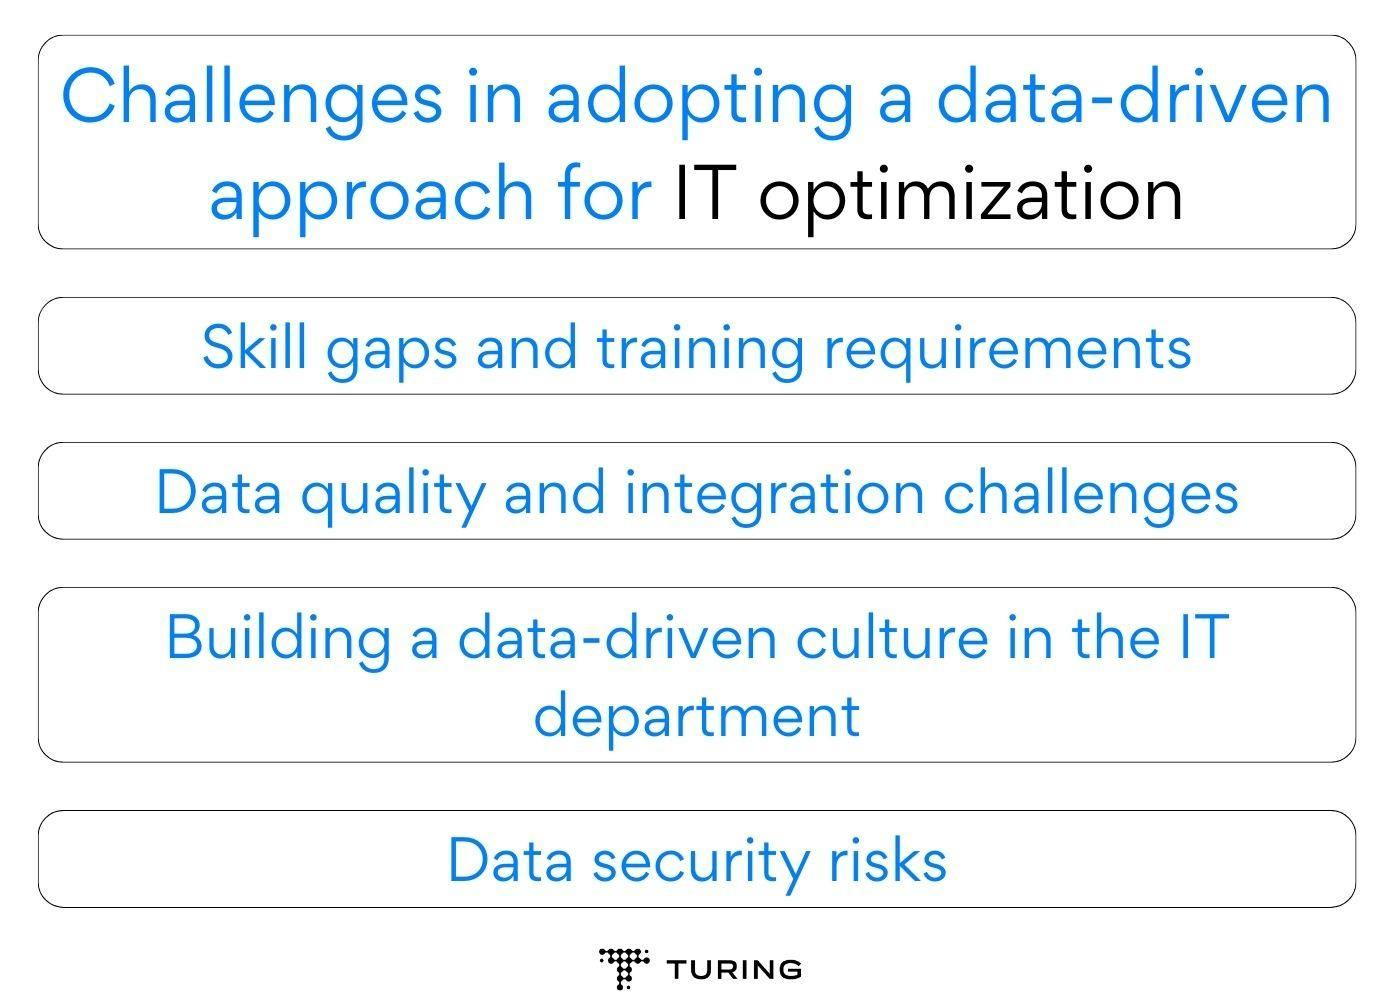 Challenges in adopting a data-driven approach for IT optimization